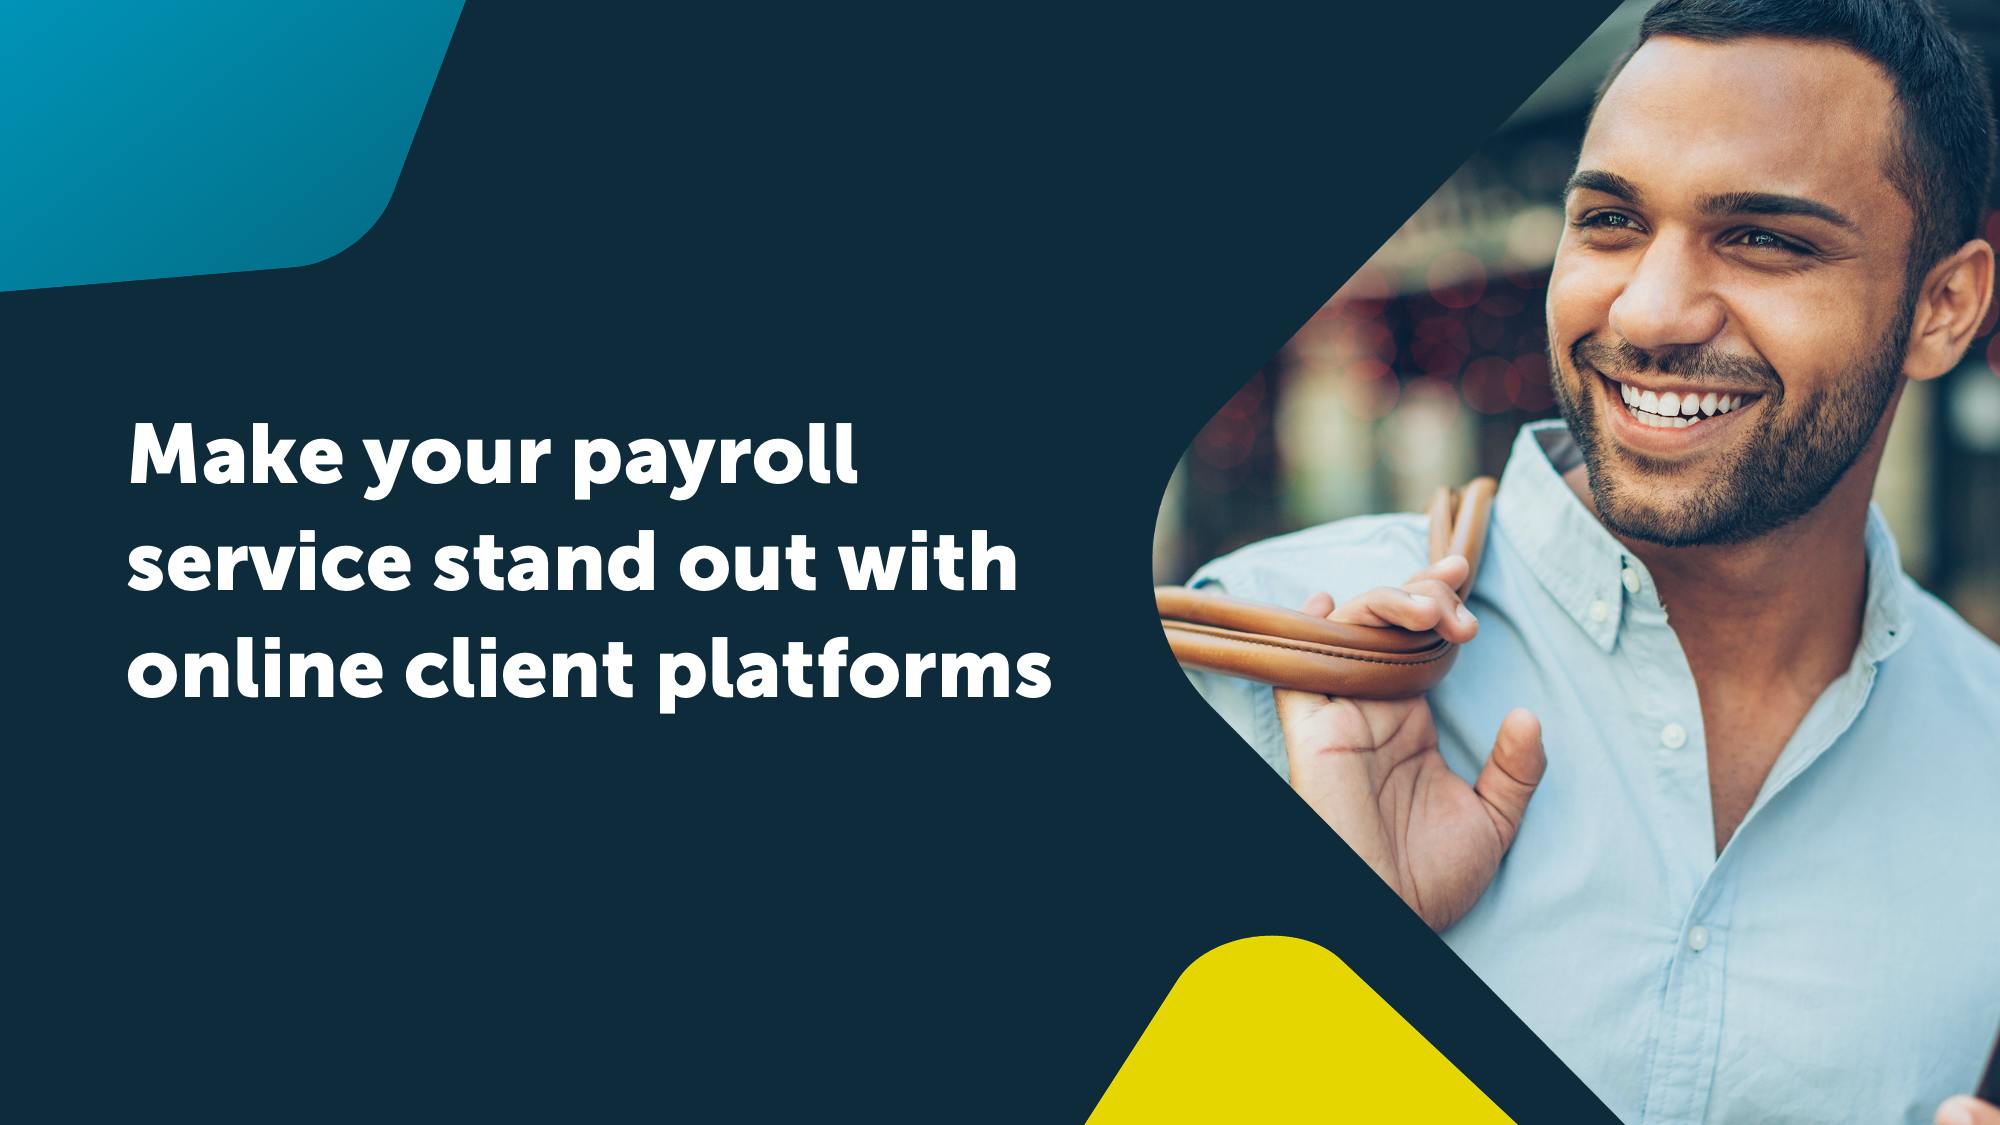 Make your payroll service stand out with online client platforms